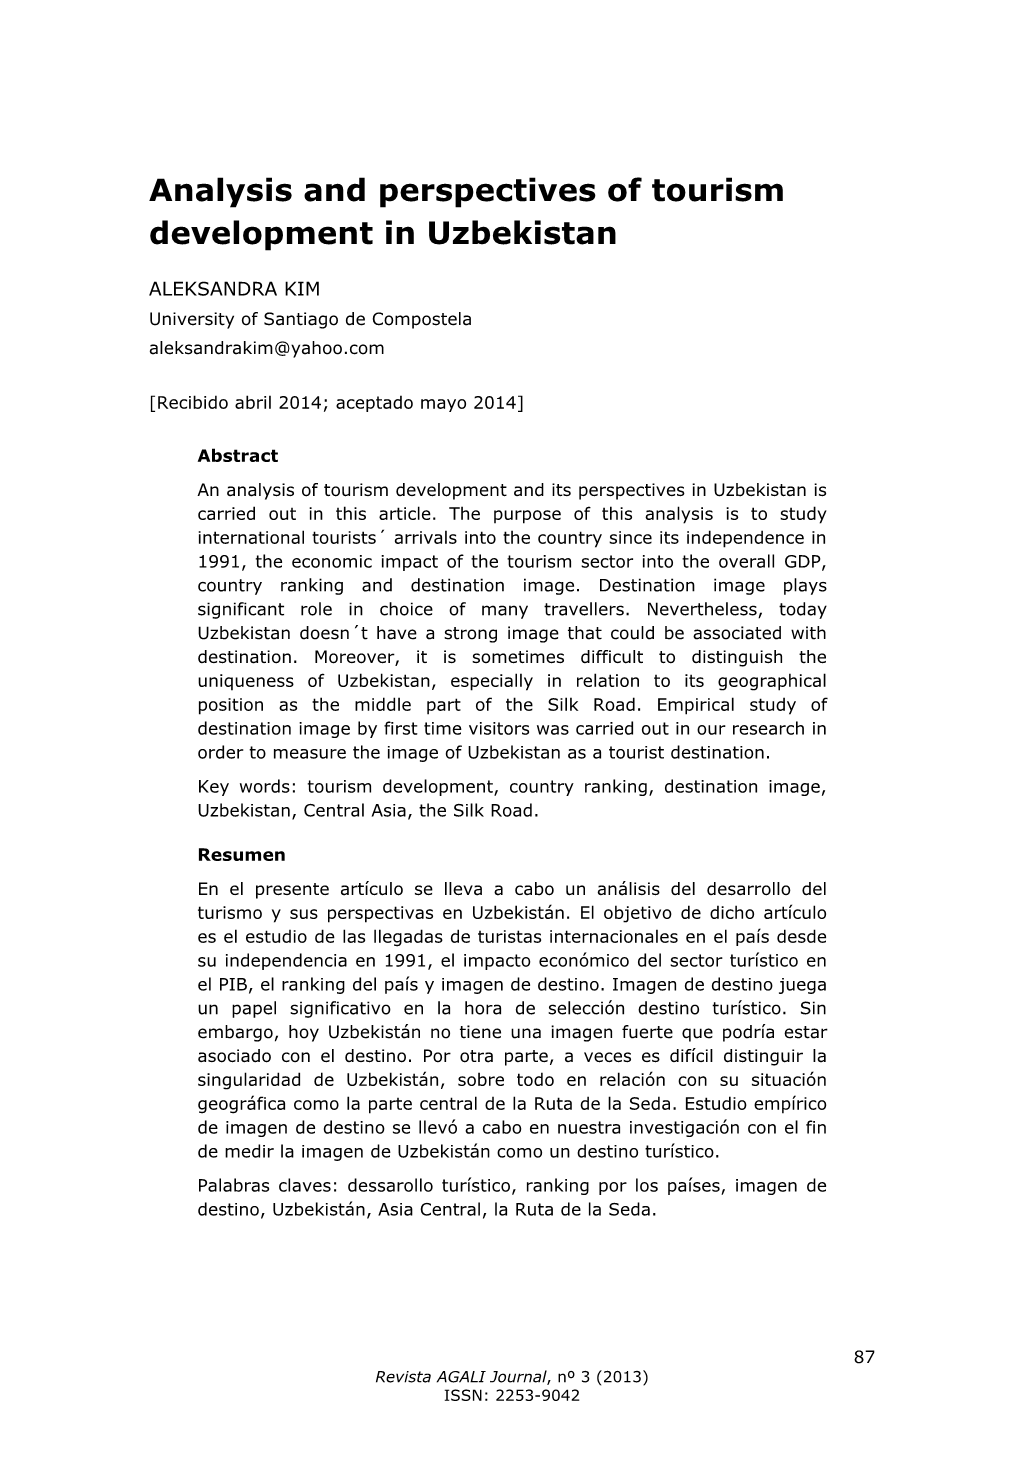 Analysis and Perspectives of Tourism Development in Uzbekistan